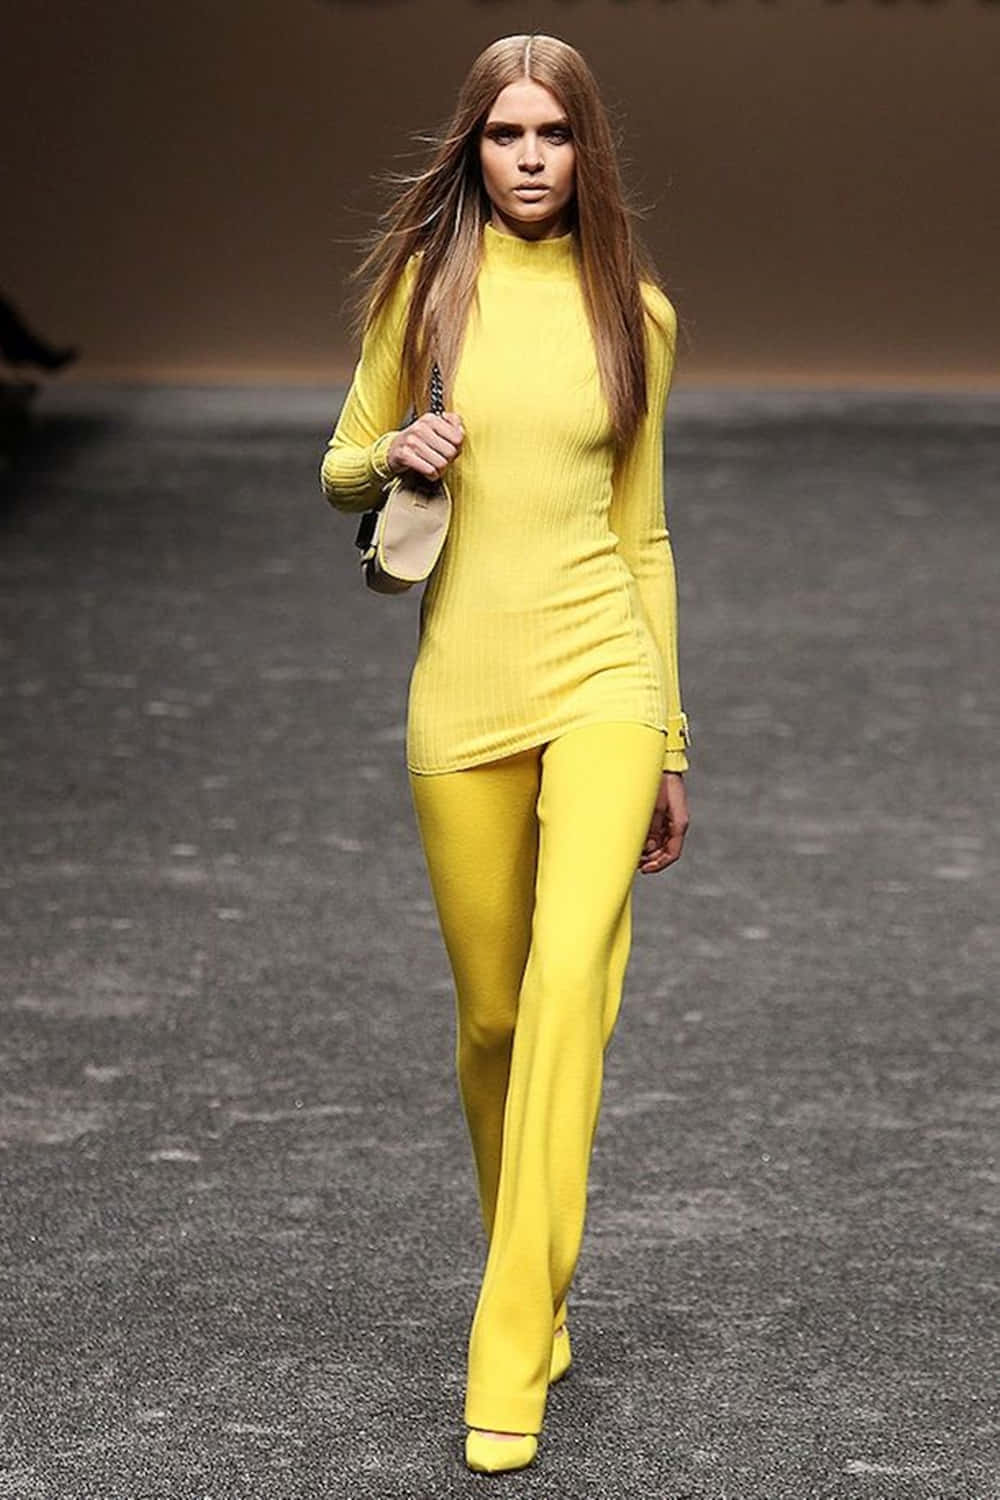 Vibrant and Chic Yellow Fashion Outfit Wallpaper